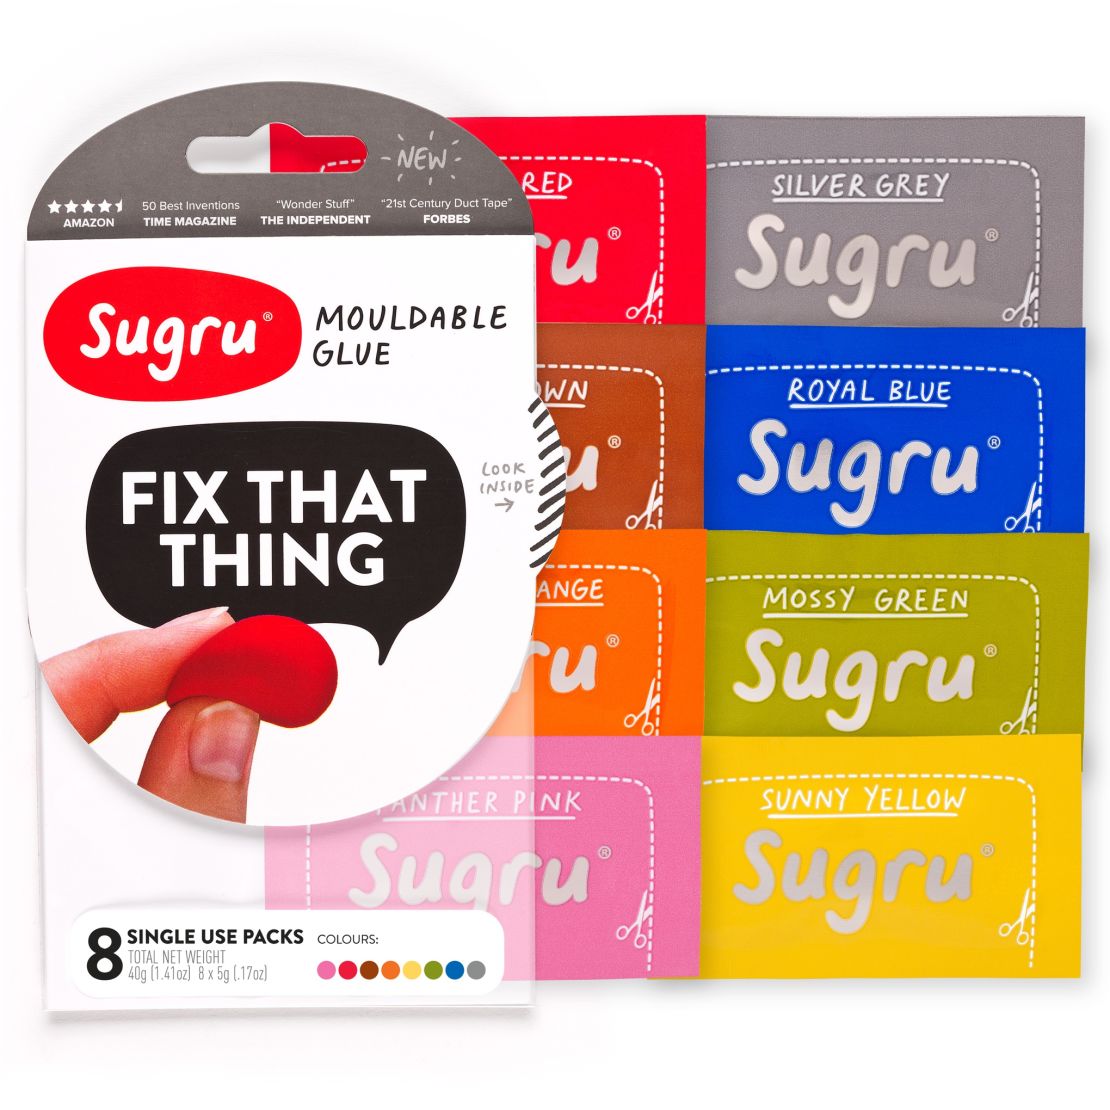 New material "Sugru" allows users to "hack their products."